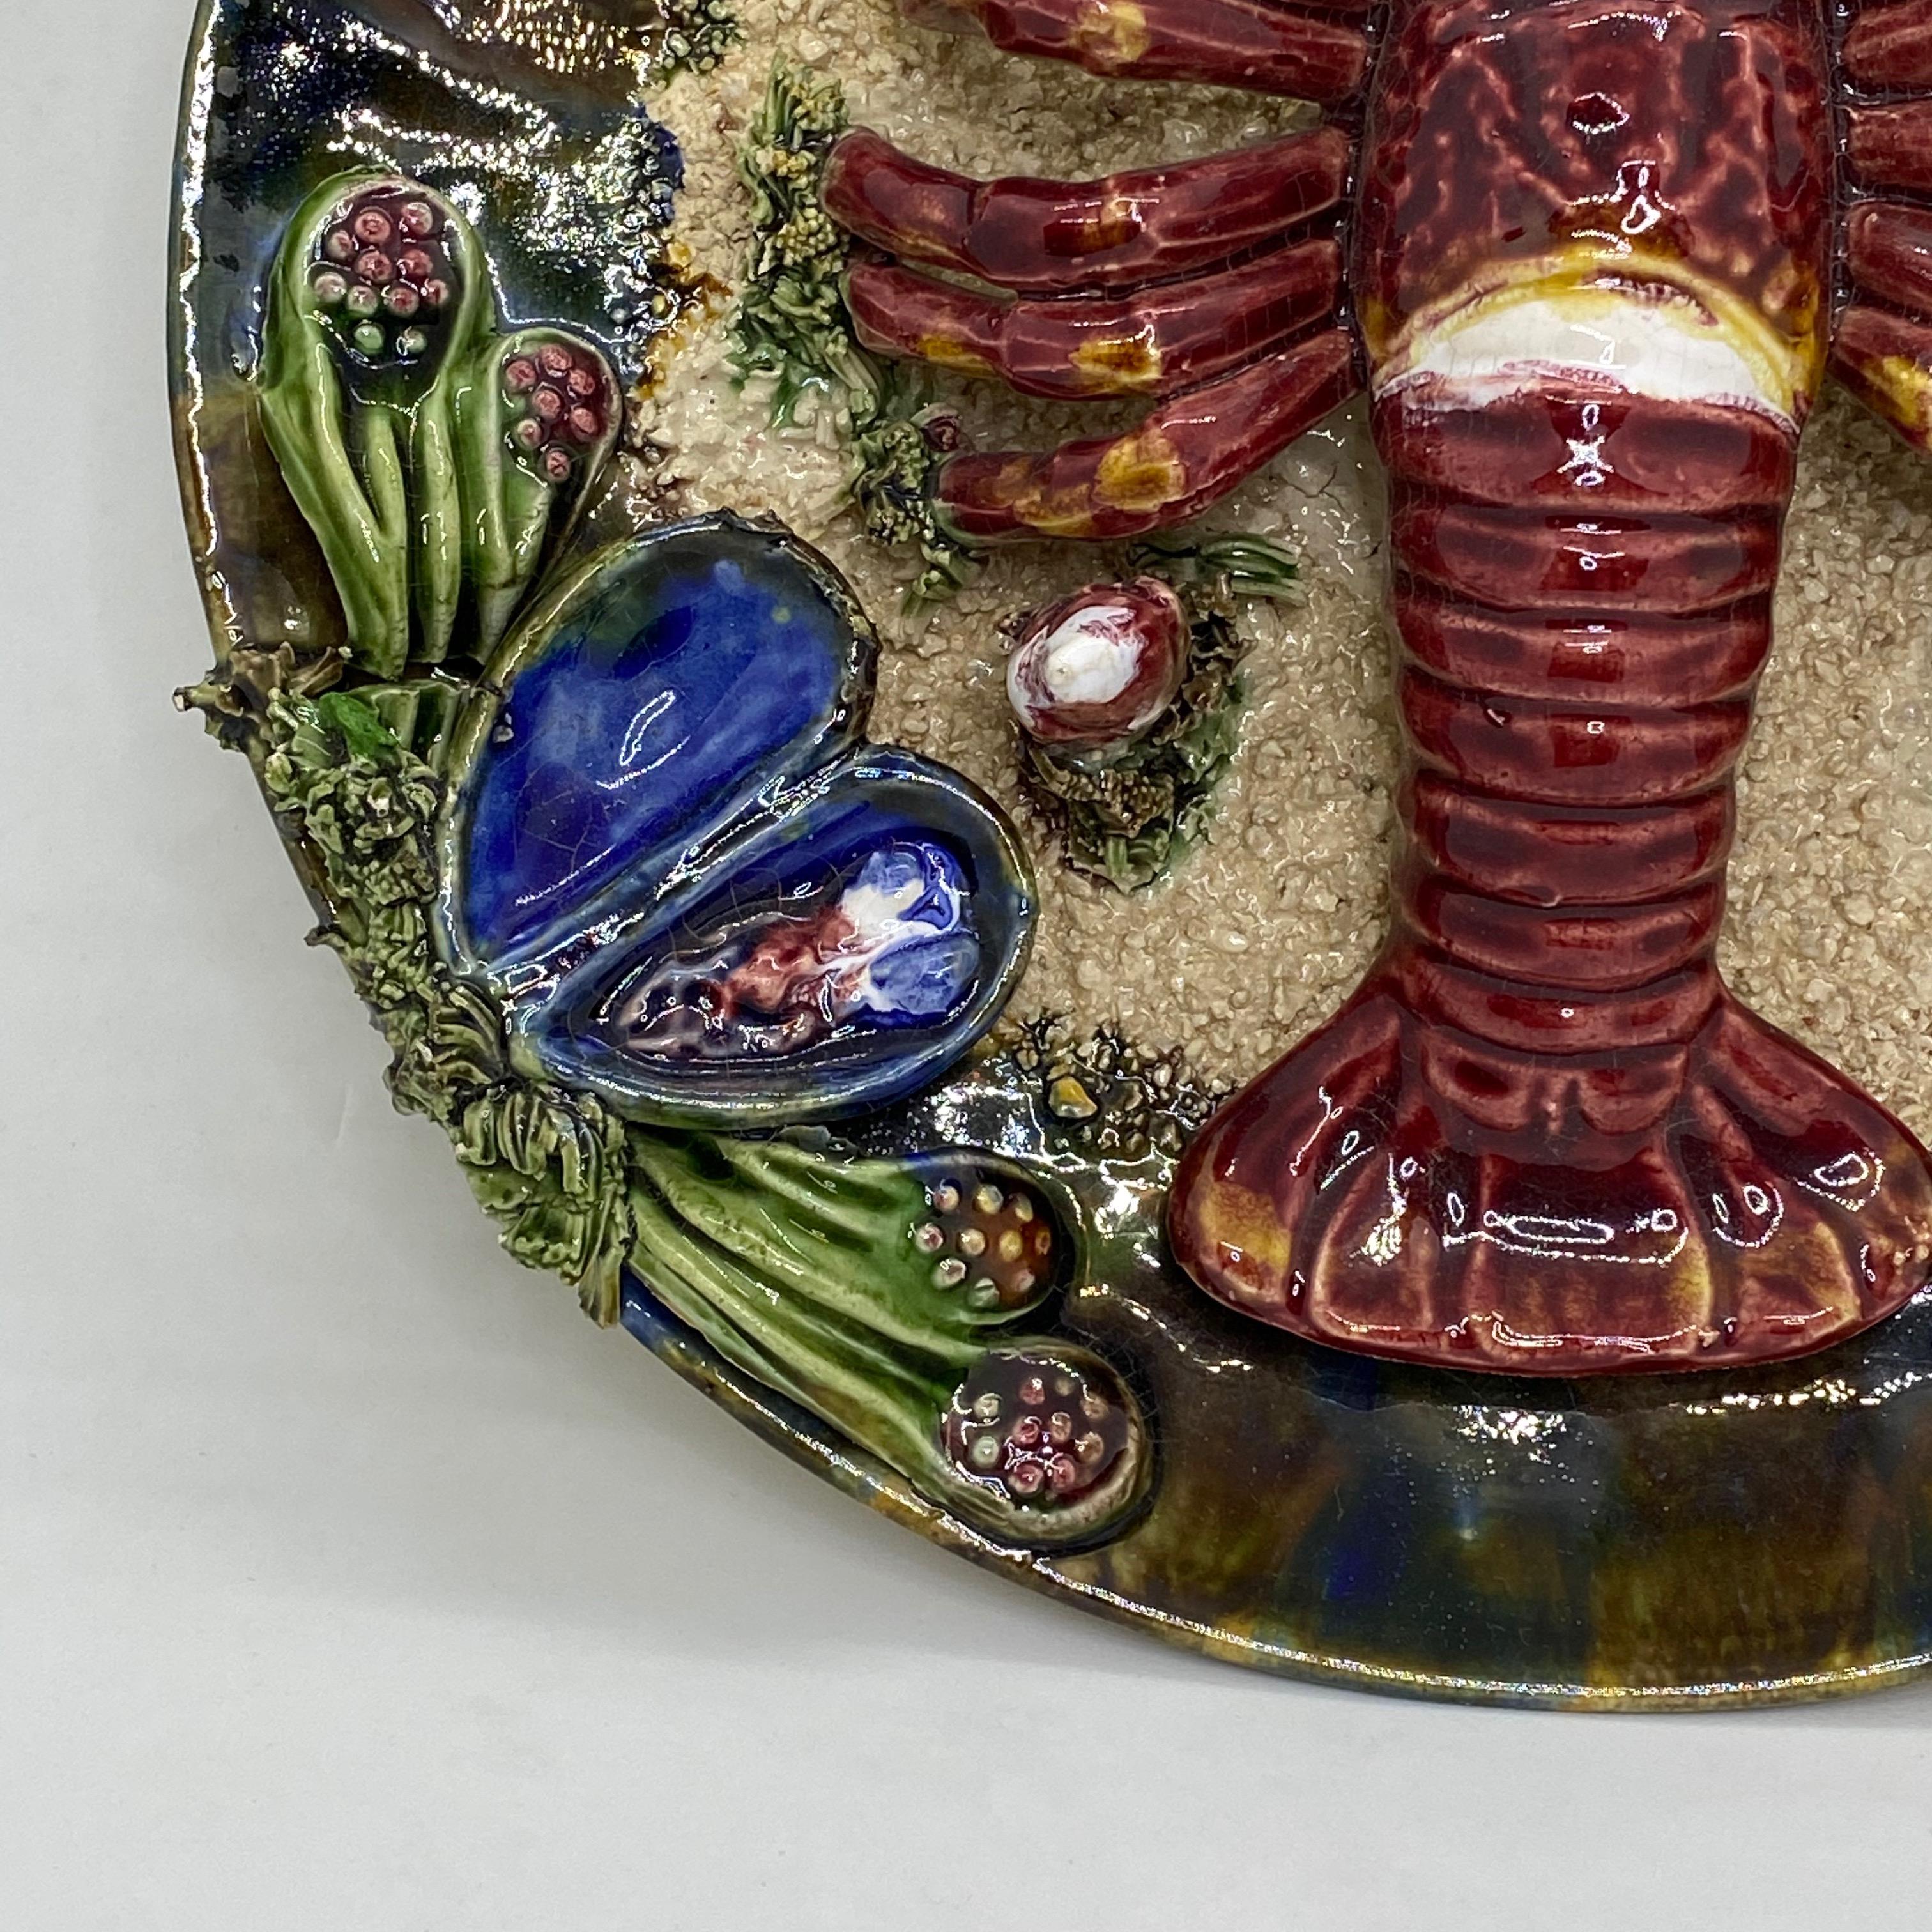 Beautiful majolica wall decoration. A Lobster motif. A beautiful piece of art for any room. The right one of the Lobster feeler was repaired.